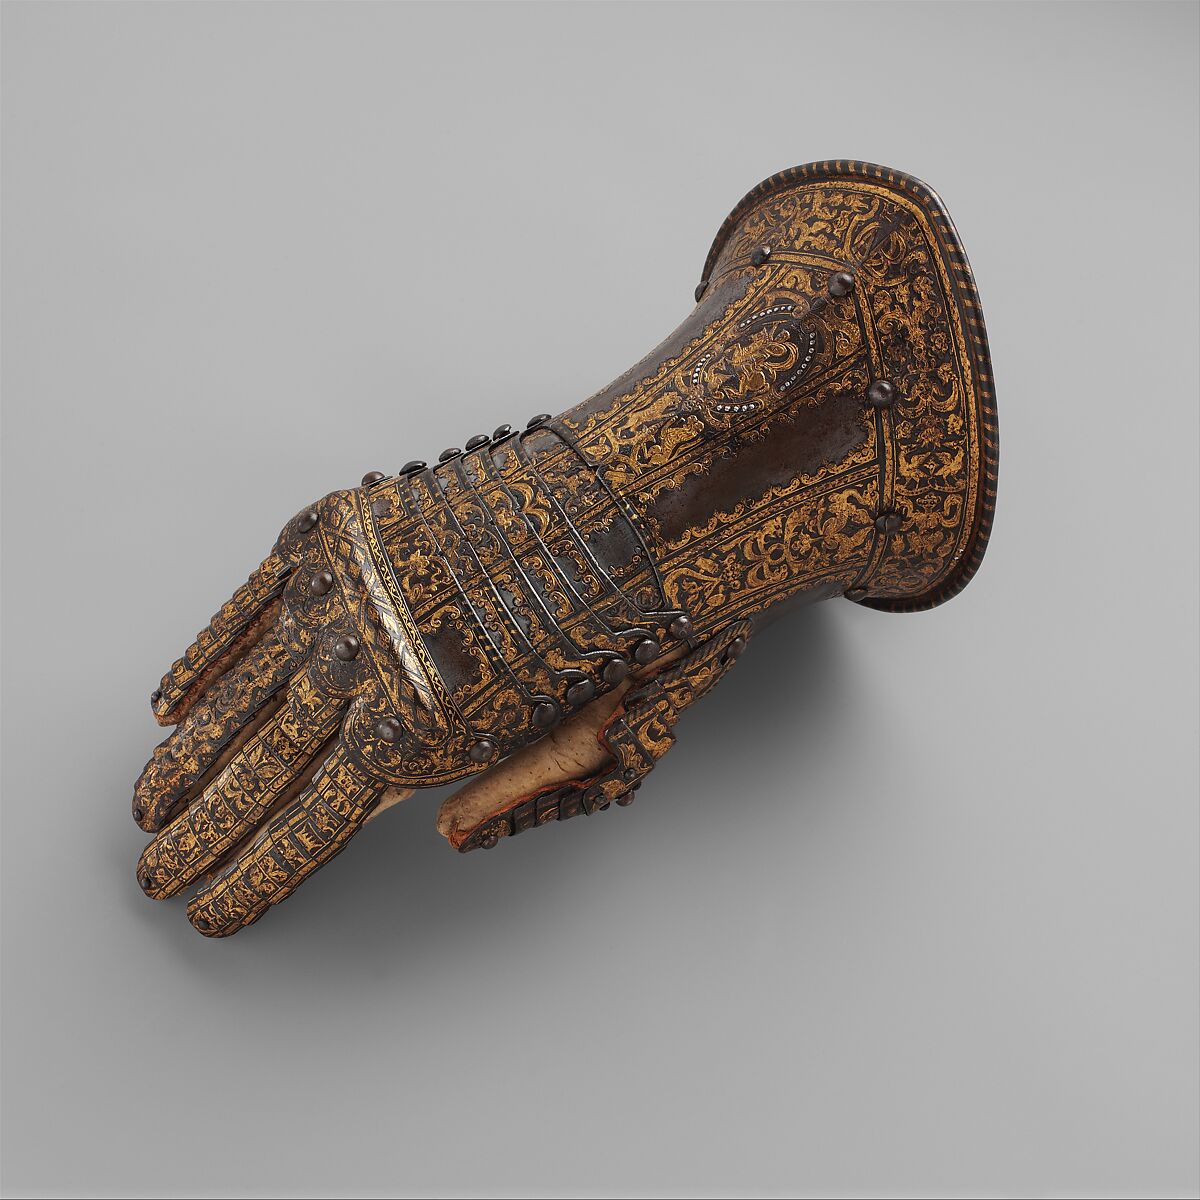 Gauntlet for the Right Hand, Belonging to the Armor of Don Alonzo Pérez de Guzman el Bueno (1550–1619), Count of Niebla and Duke of Medina-Sidonia, Steel, silver, gold, textile, leather, Italian, Milan 